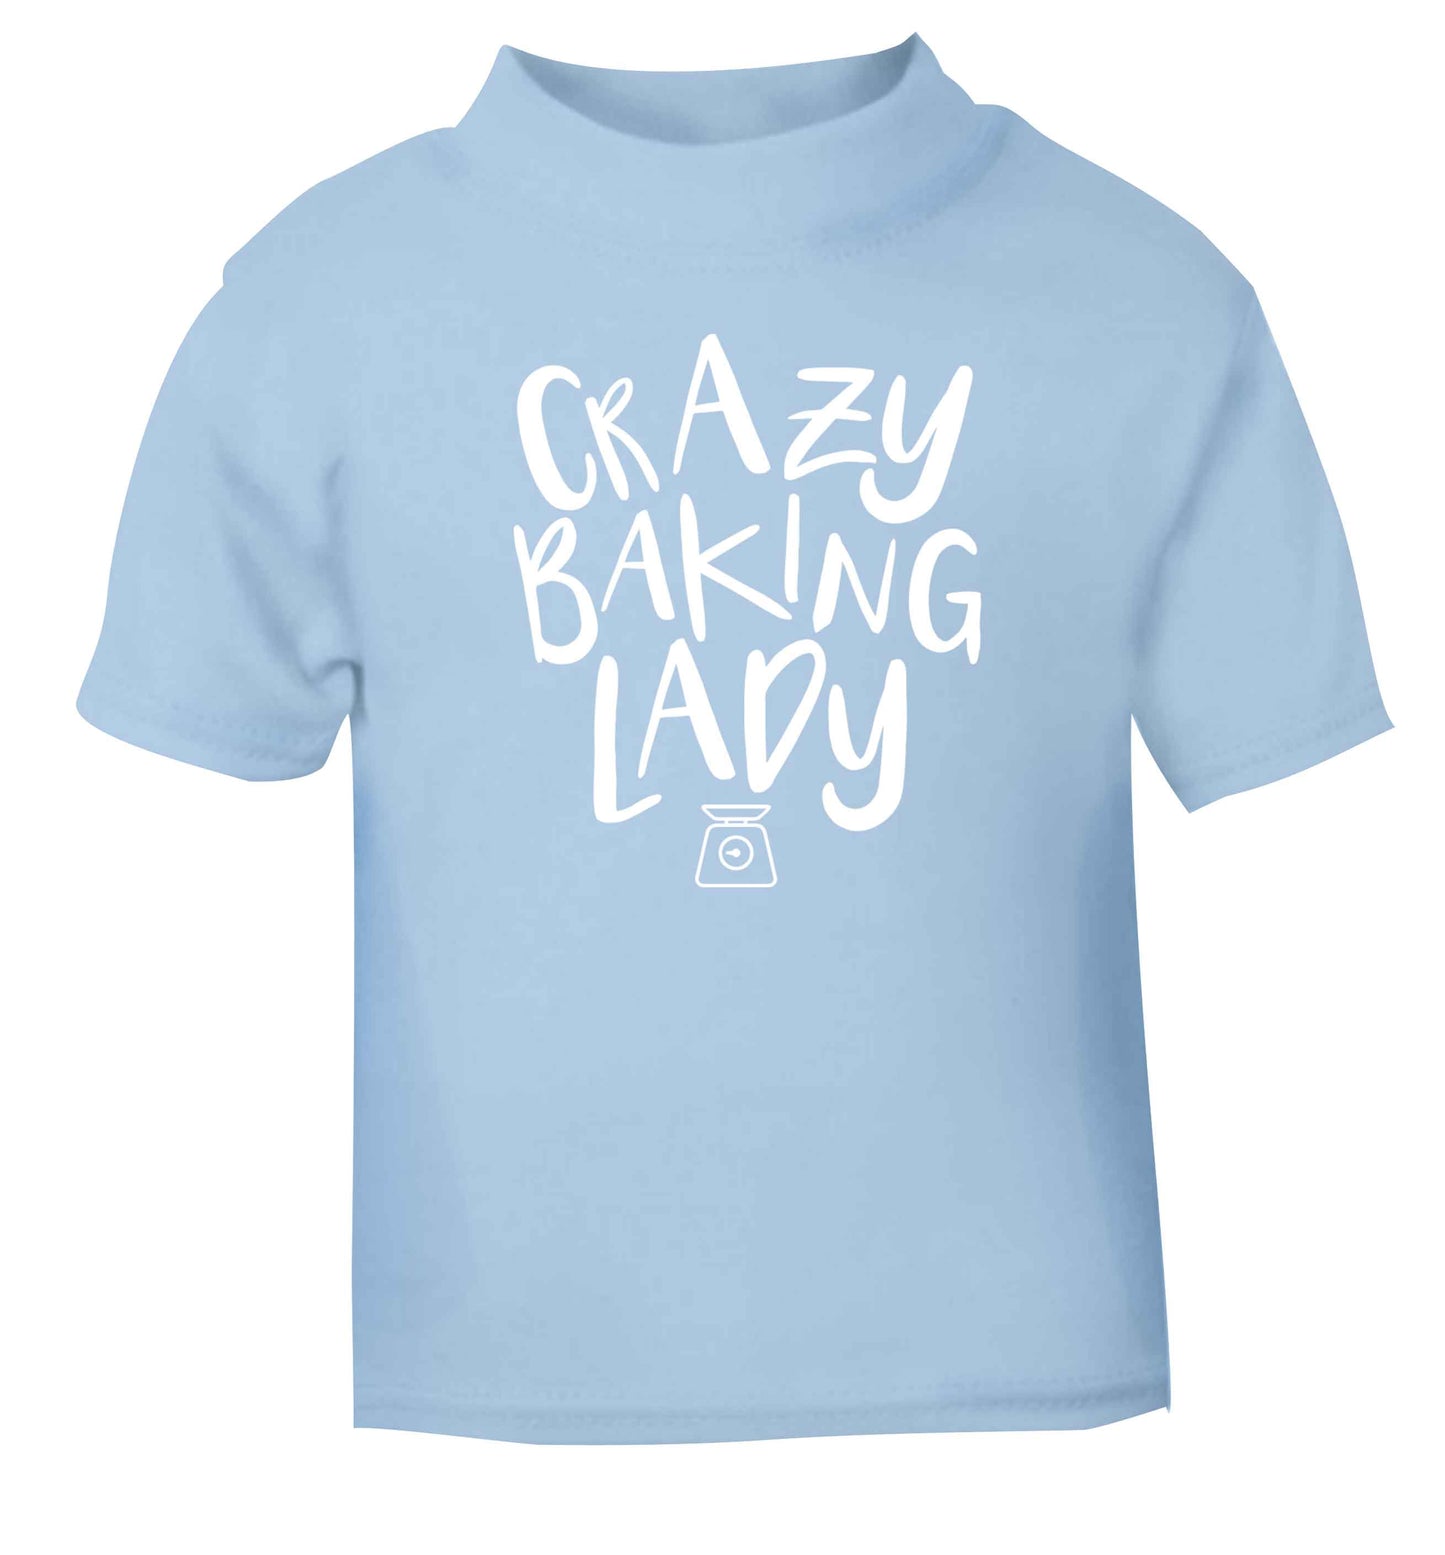 Crazy baking lady light blue Baby Toddler Tshirt 2 Years